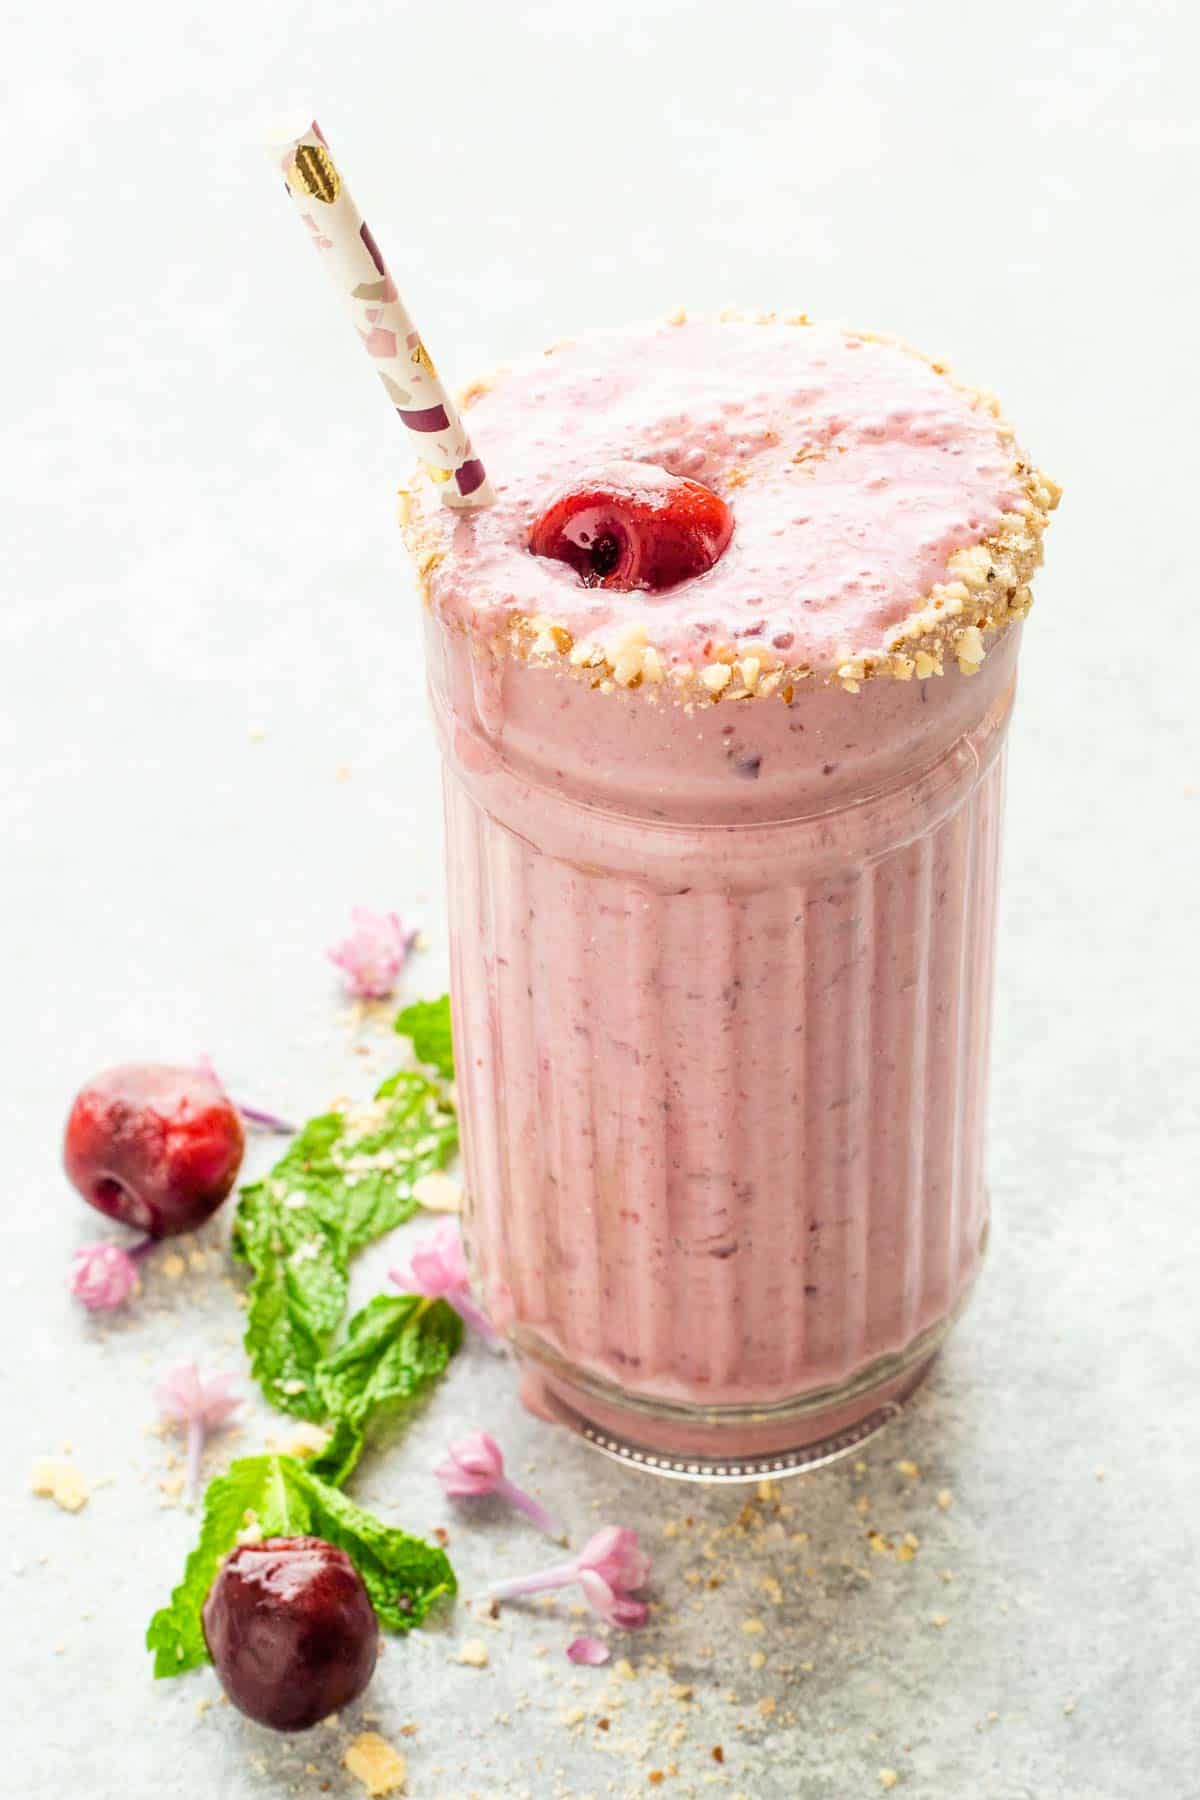 A light pink Cherry Smoothie in a decorative glass with a straw.